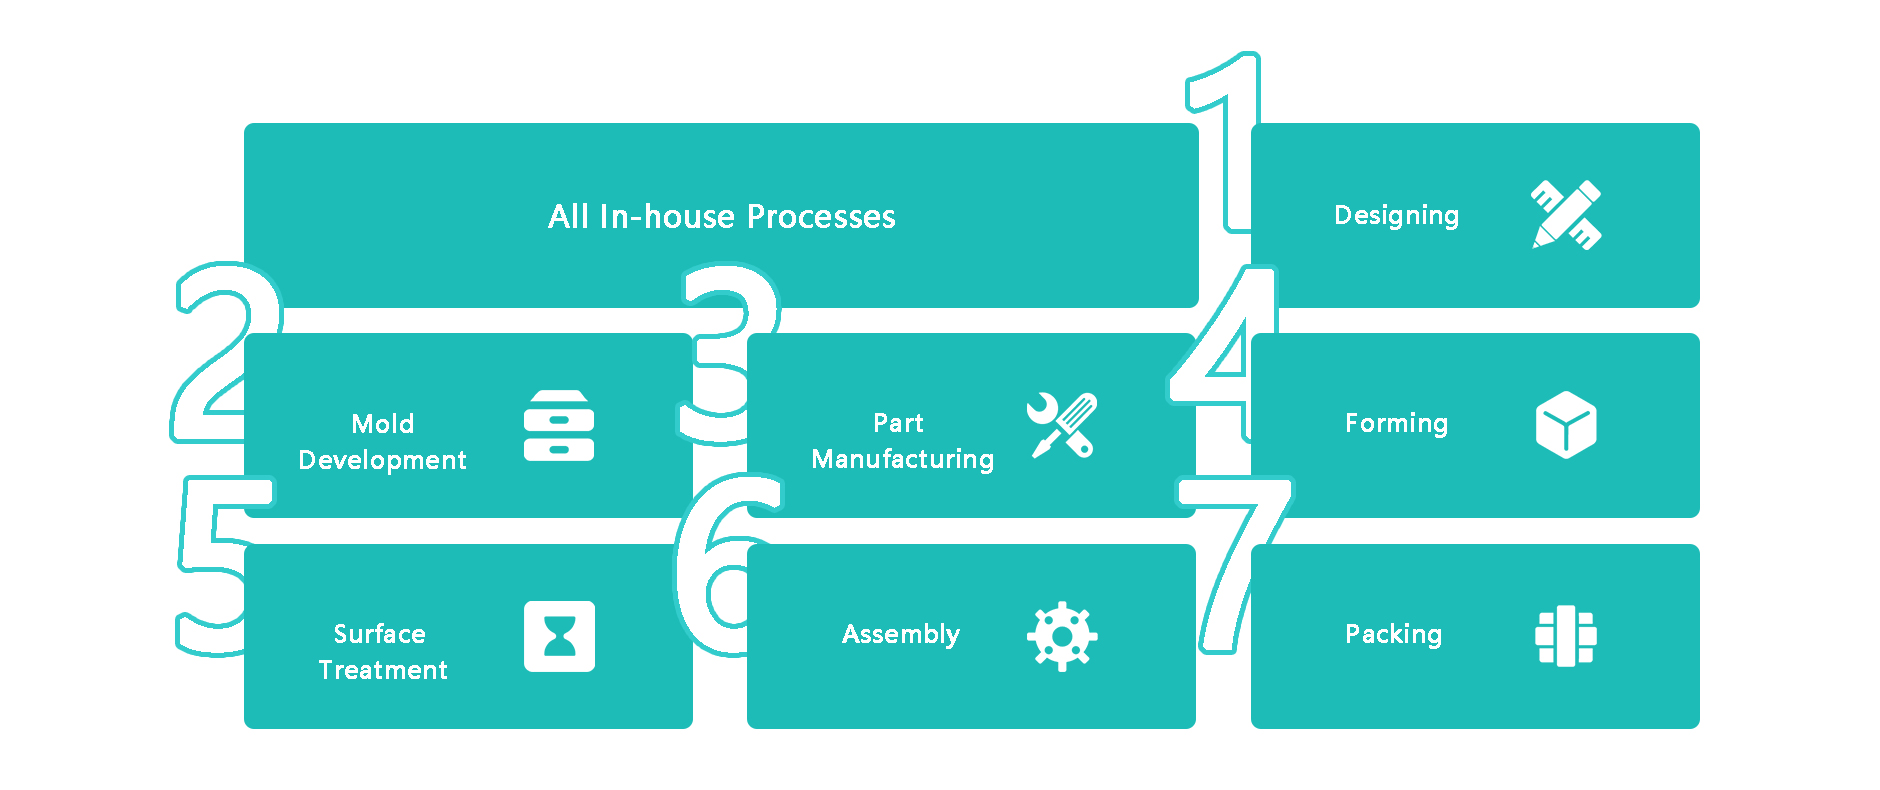 ALL In-house Processes